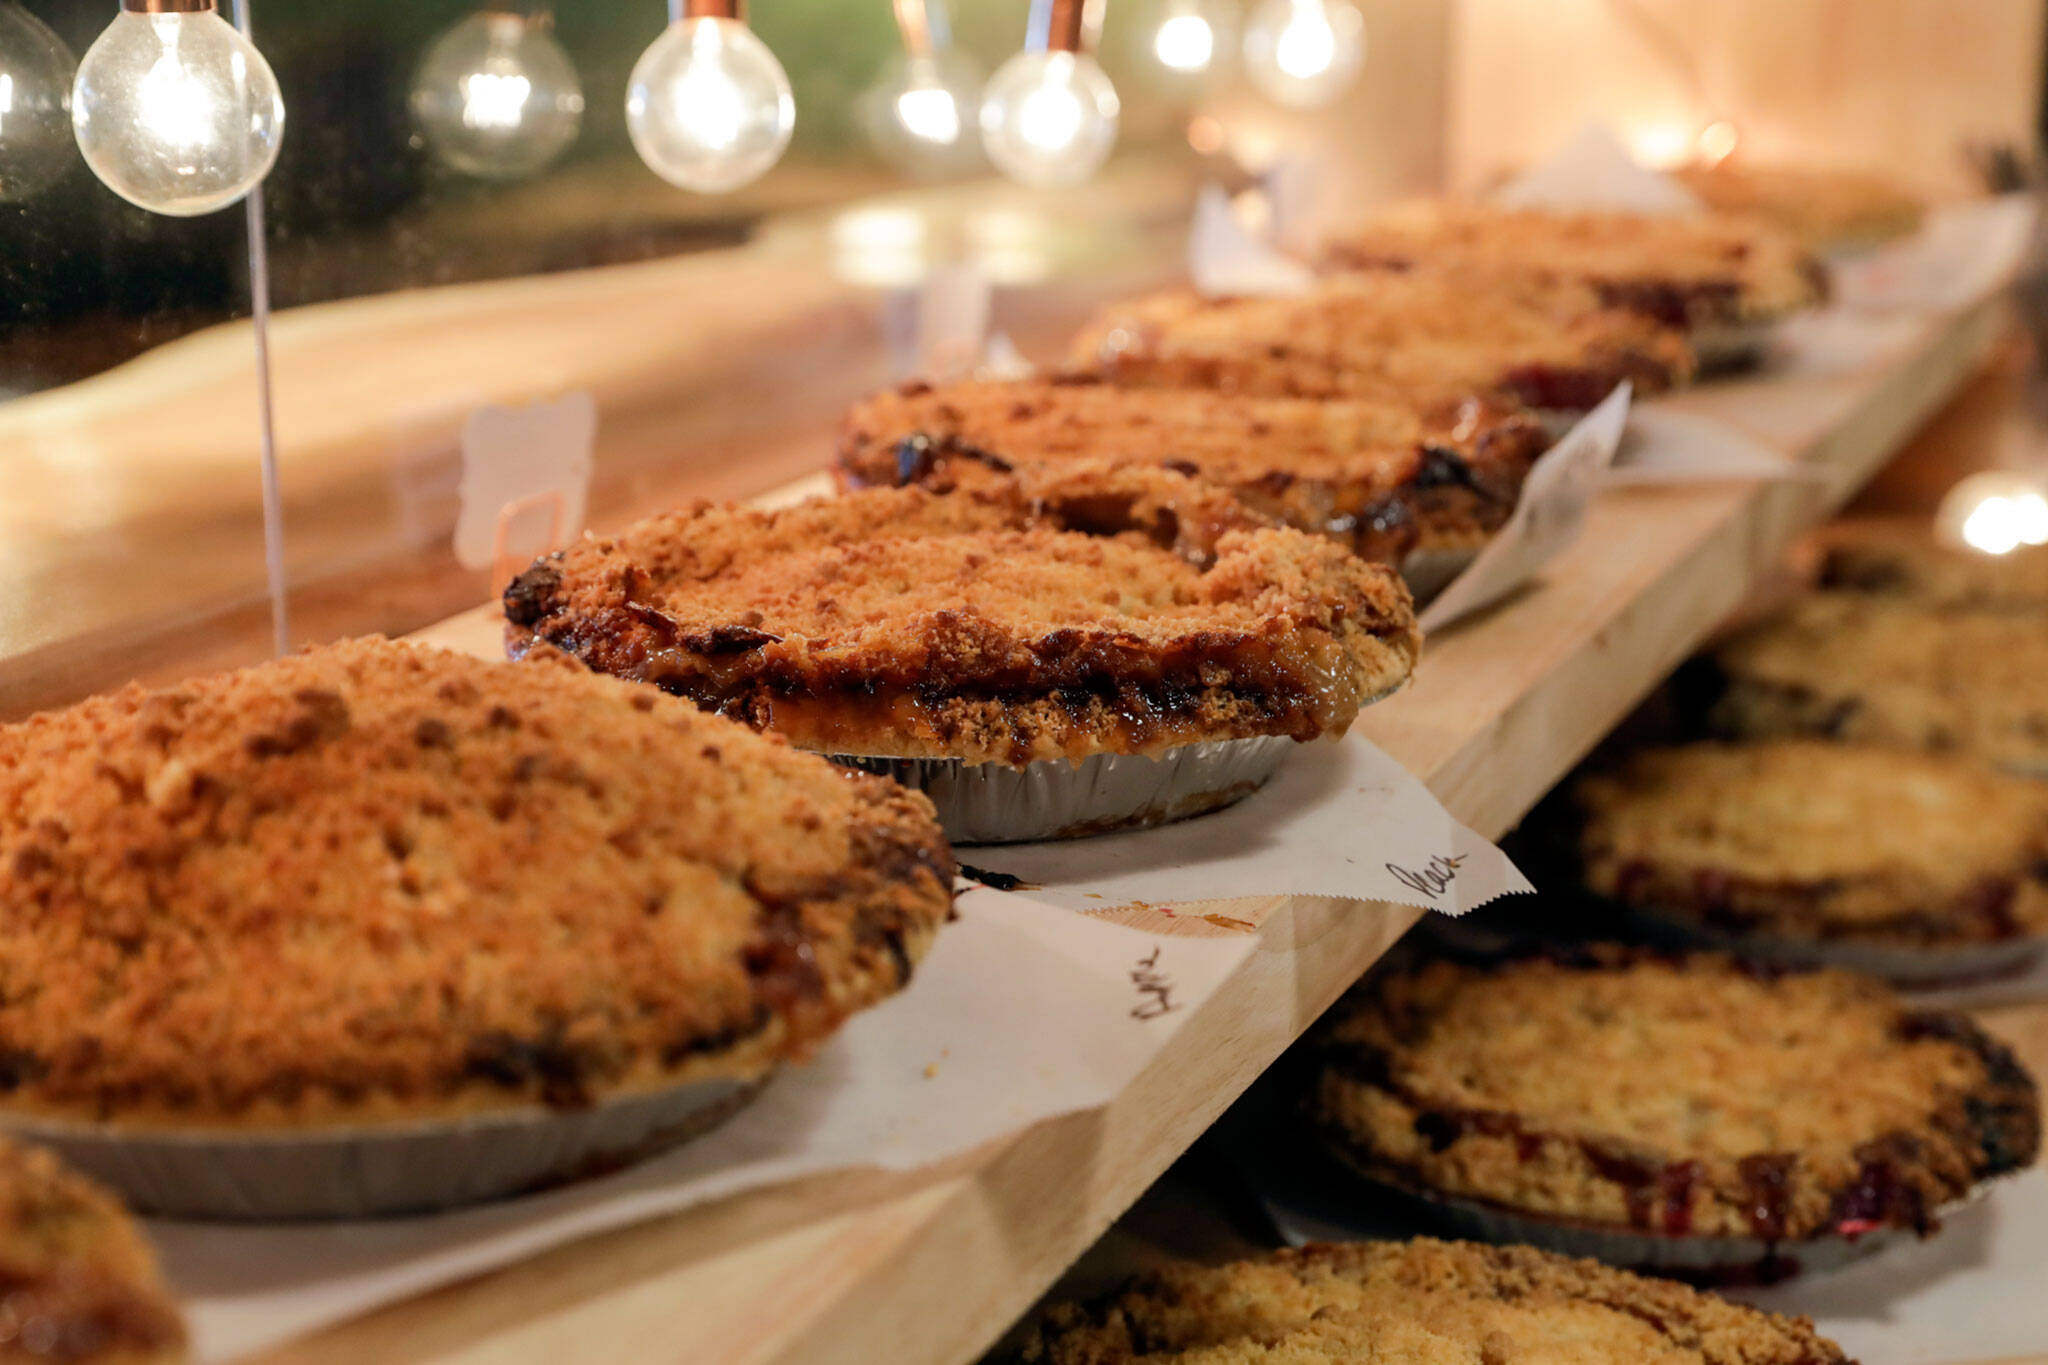 Pot pies and sweet pies await customers at the newly opened Pie Dive Bar in Snohomish. (Kevin Clark / The Herald)